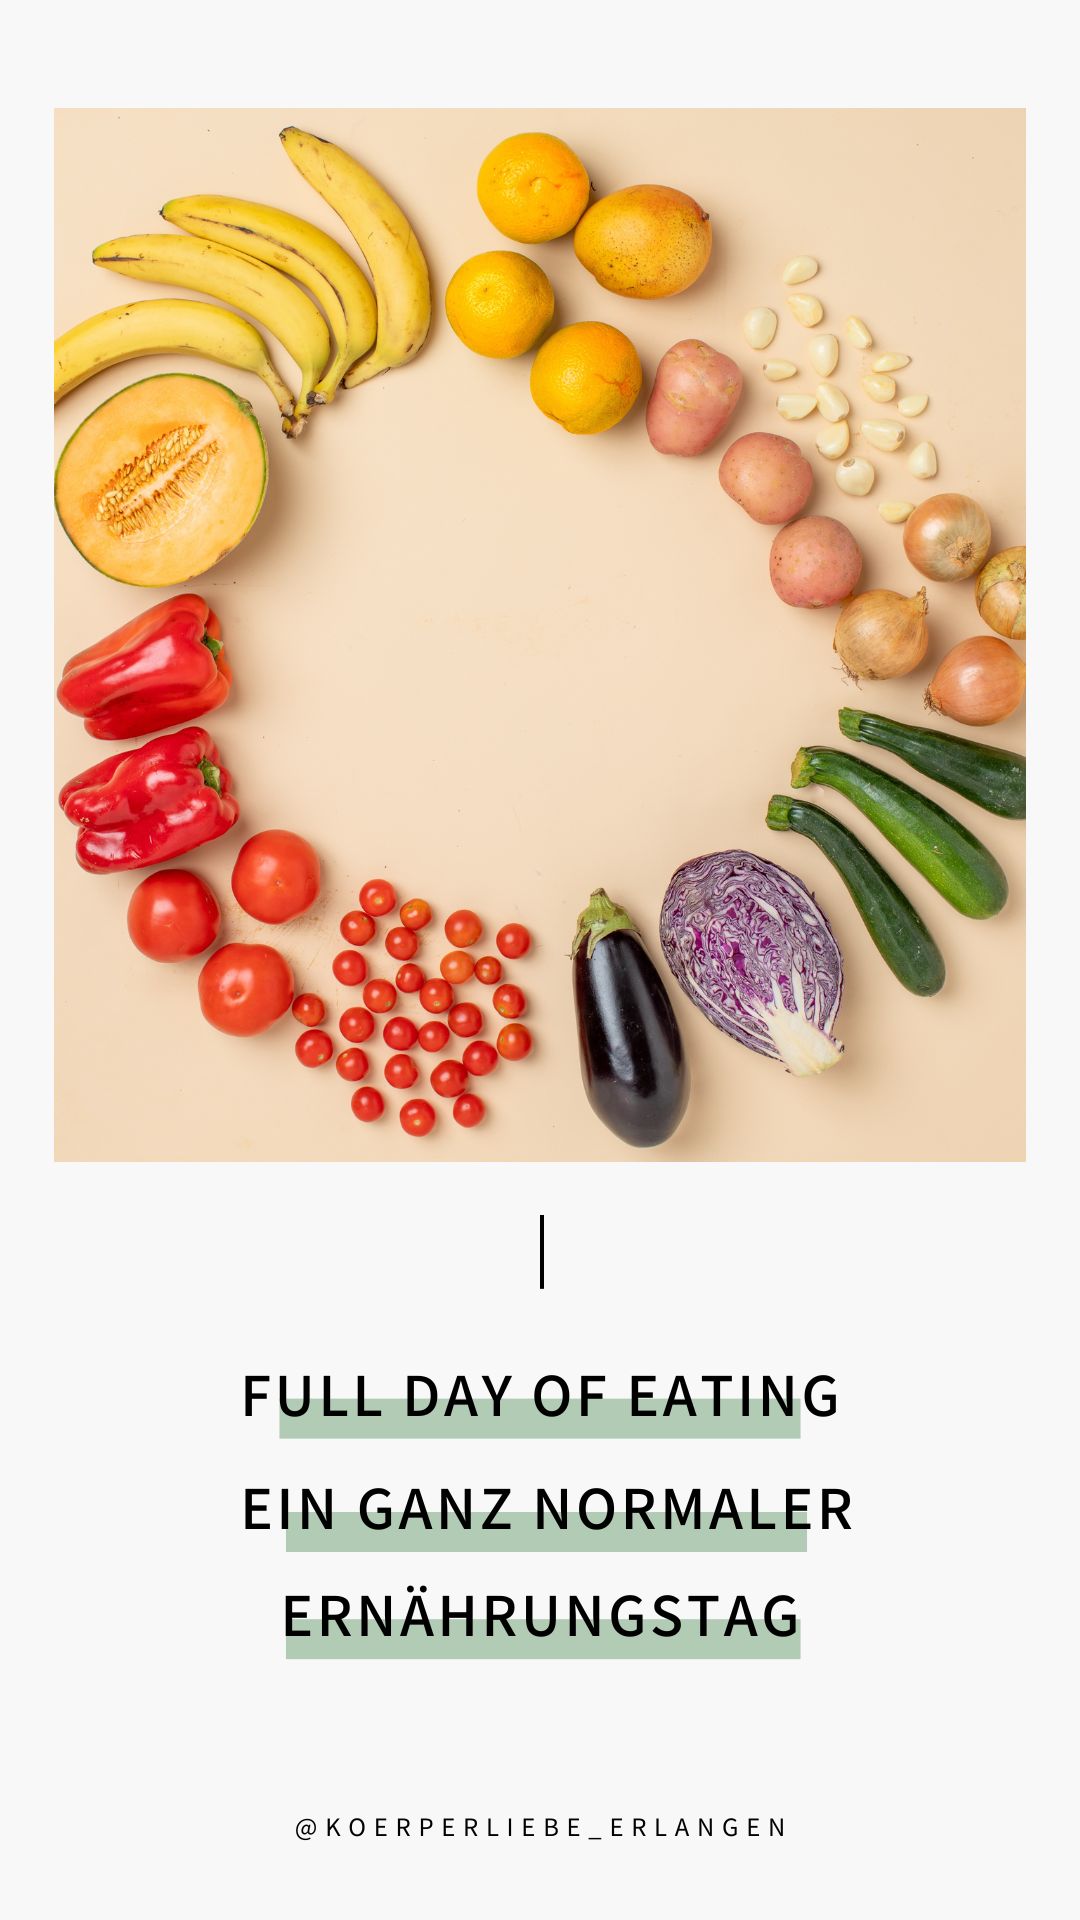 Featured image for “FULL DAY OF EATING”